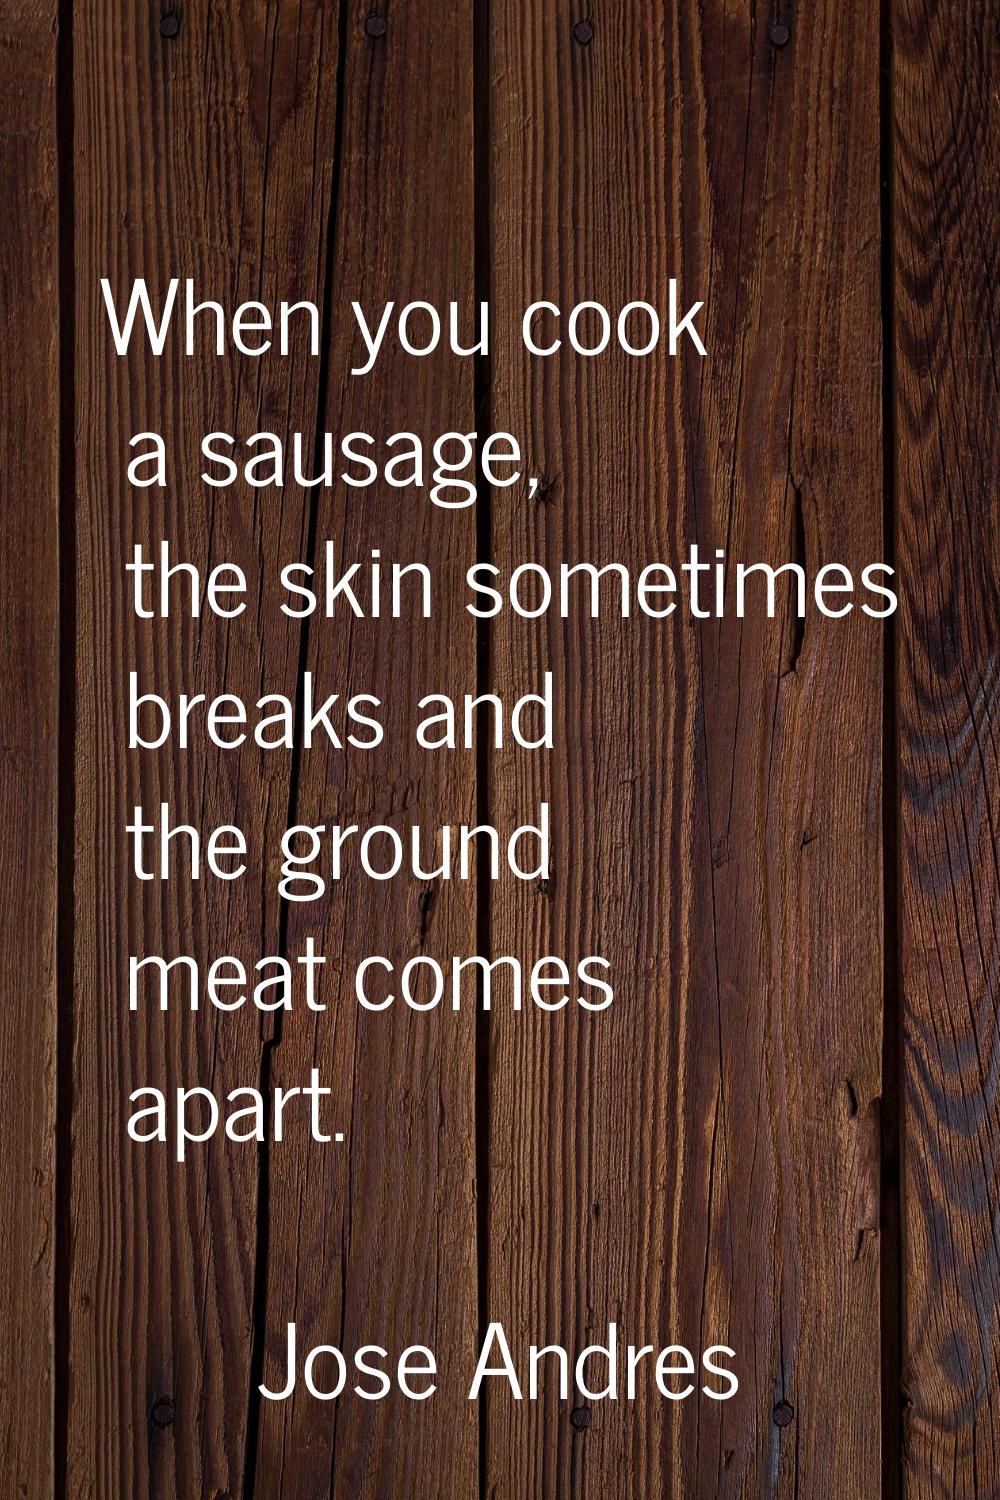 When you cook a sausage, the skin sometimes breaks and the ground meat comes apart.